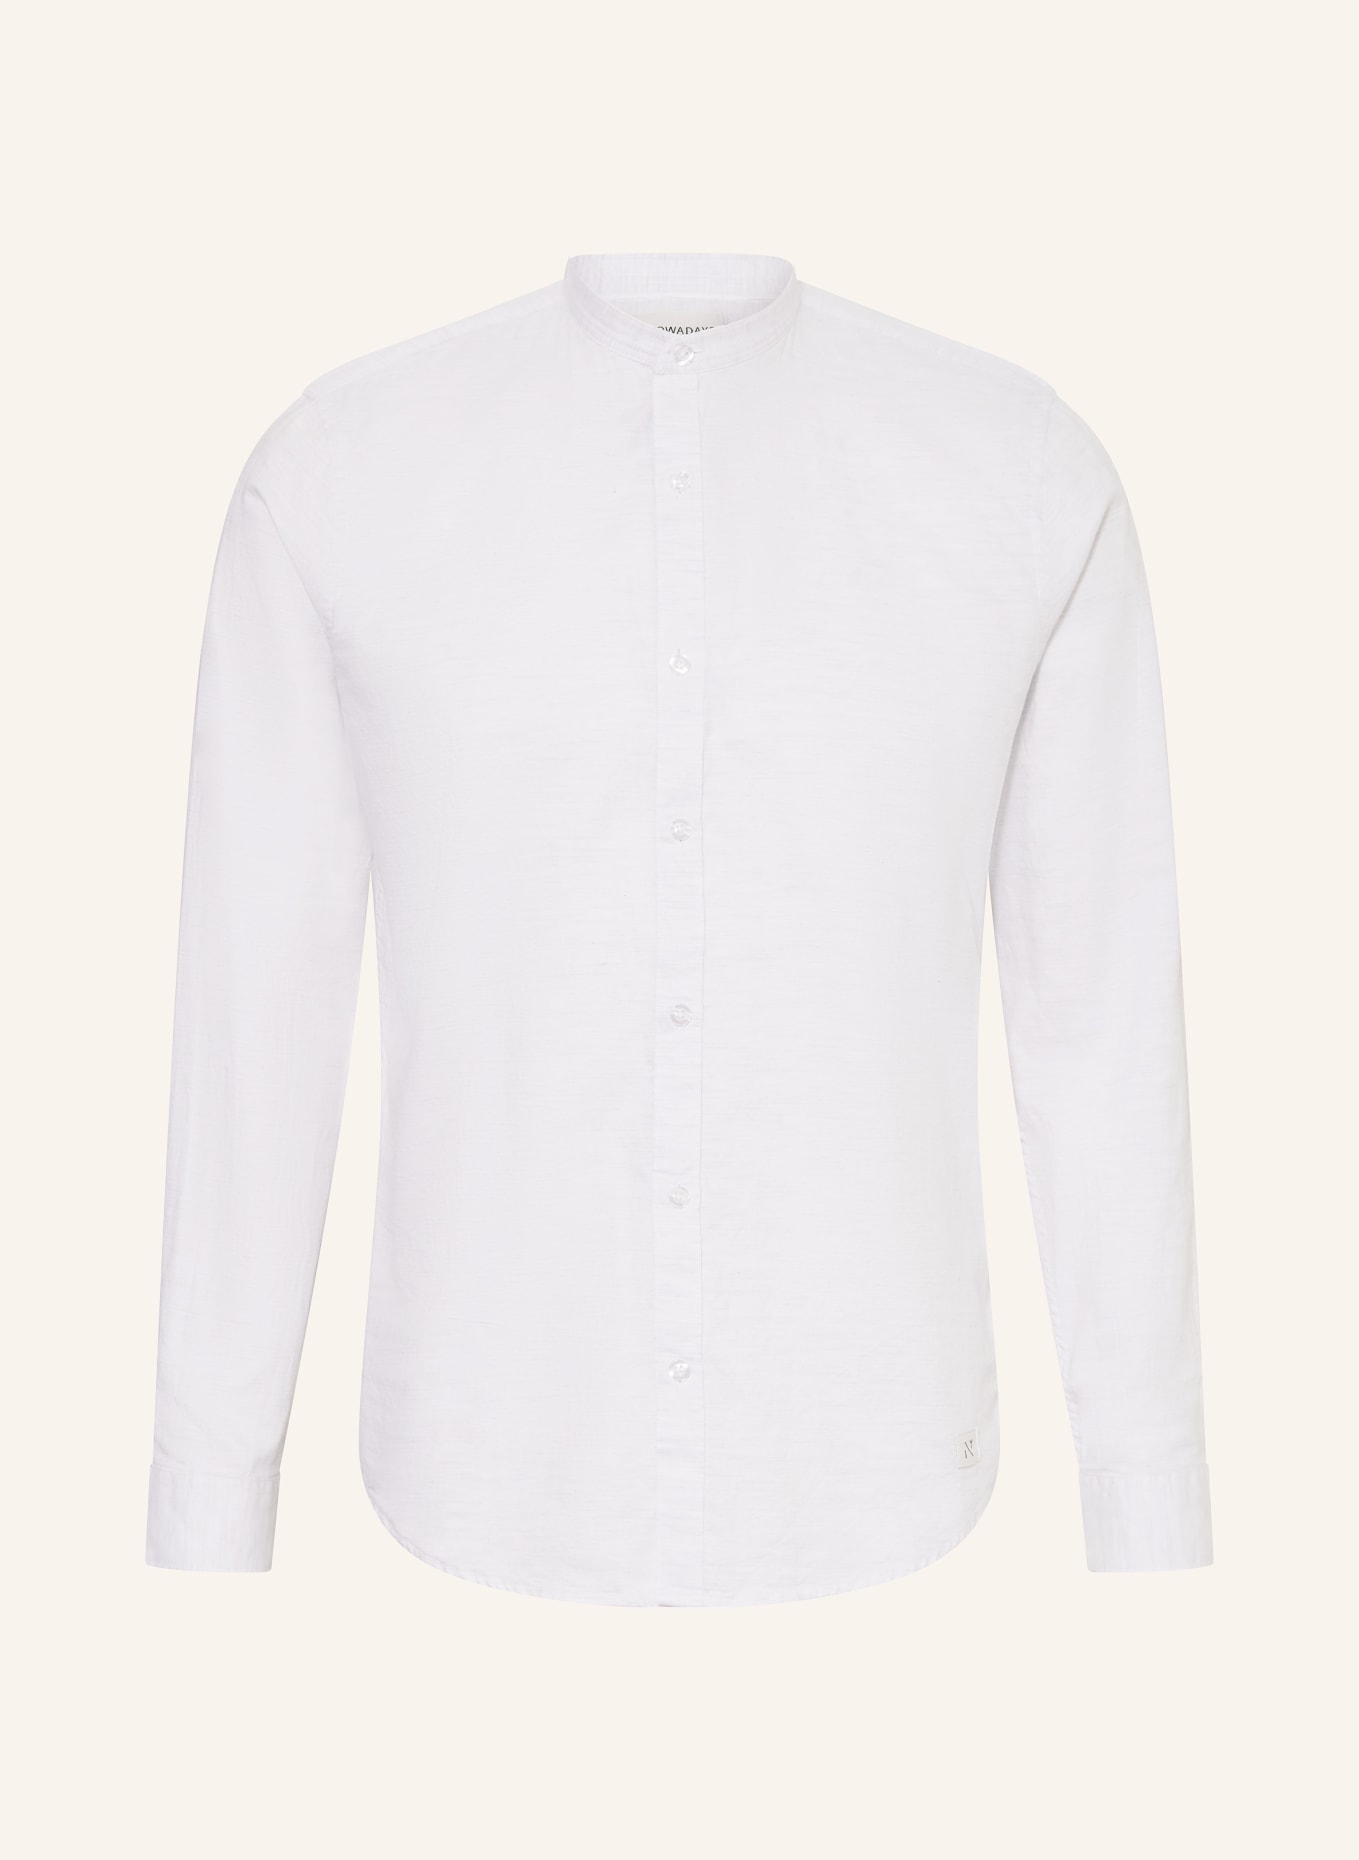 NOWADAYS Shirt regular fit with stand-up collar, Color: LIGHT GRAY (Image 1)